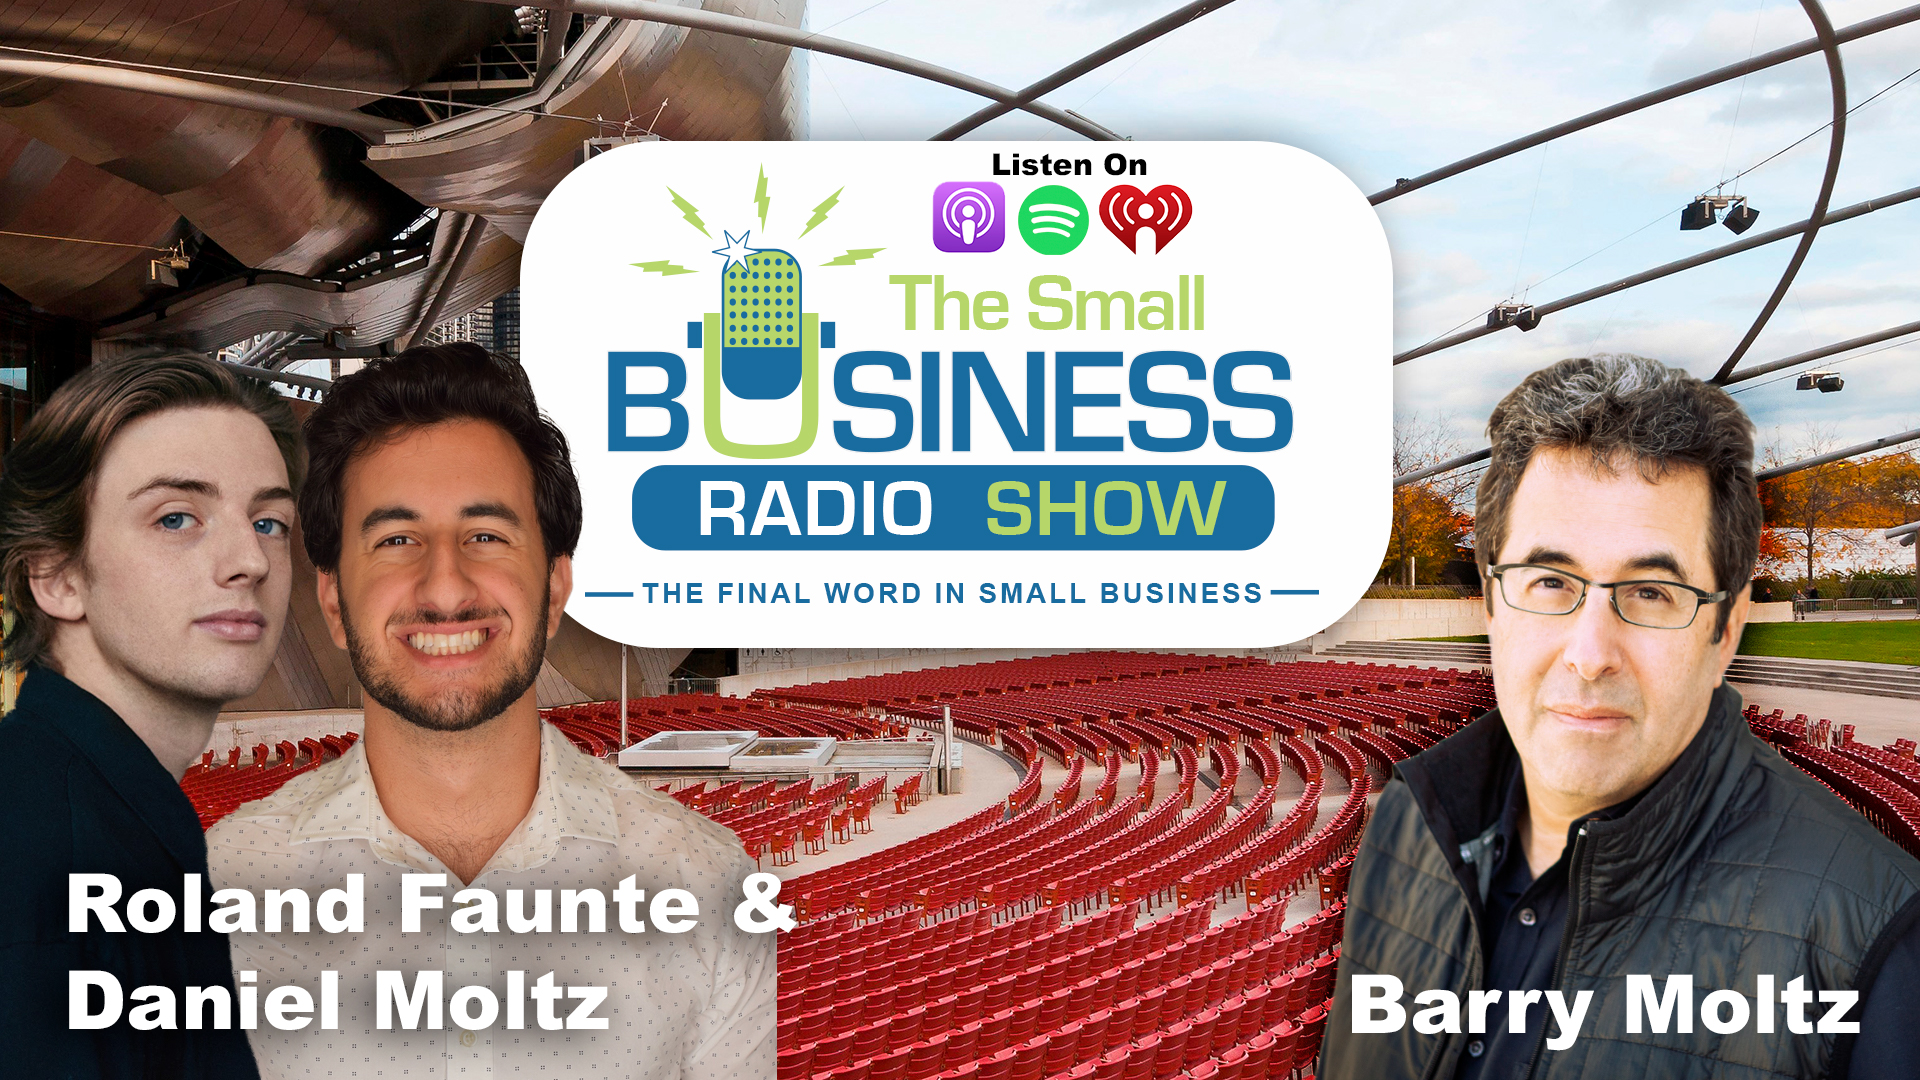 Roland Faunte on The Small Business Radio Show